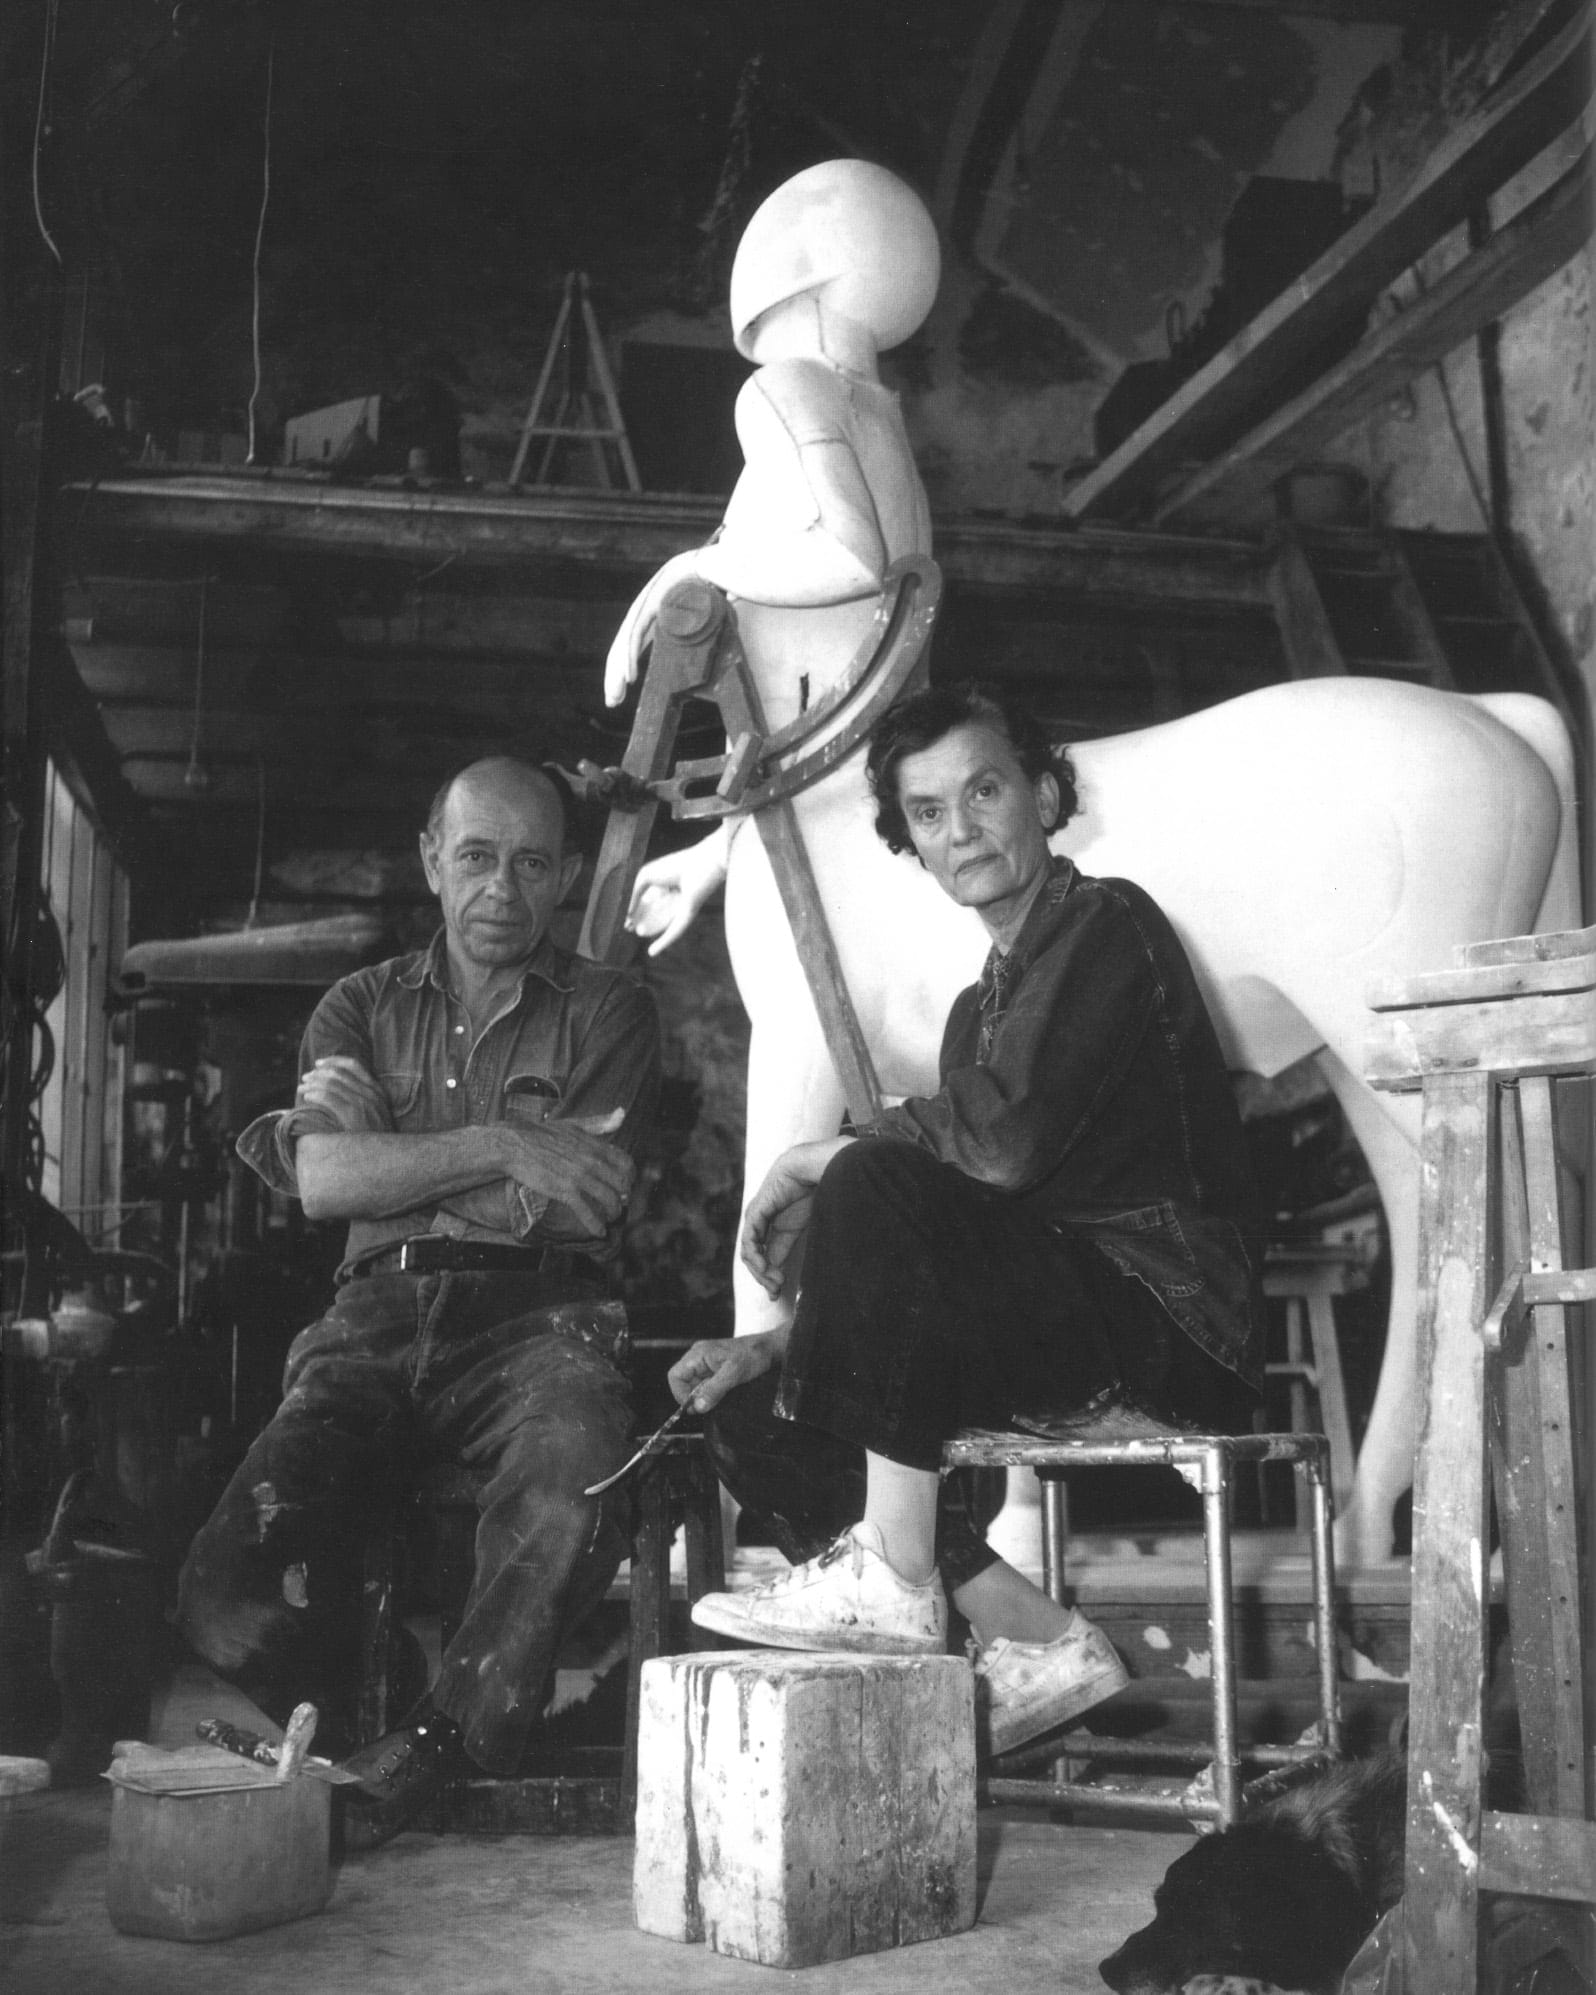 a black and white photo of the artists seated in front of the centaur sculpture